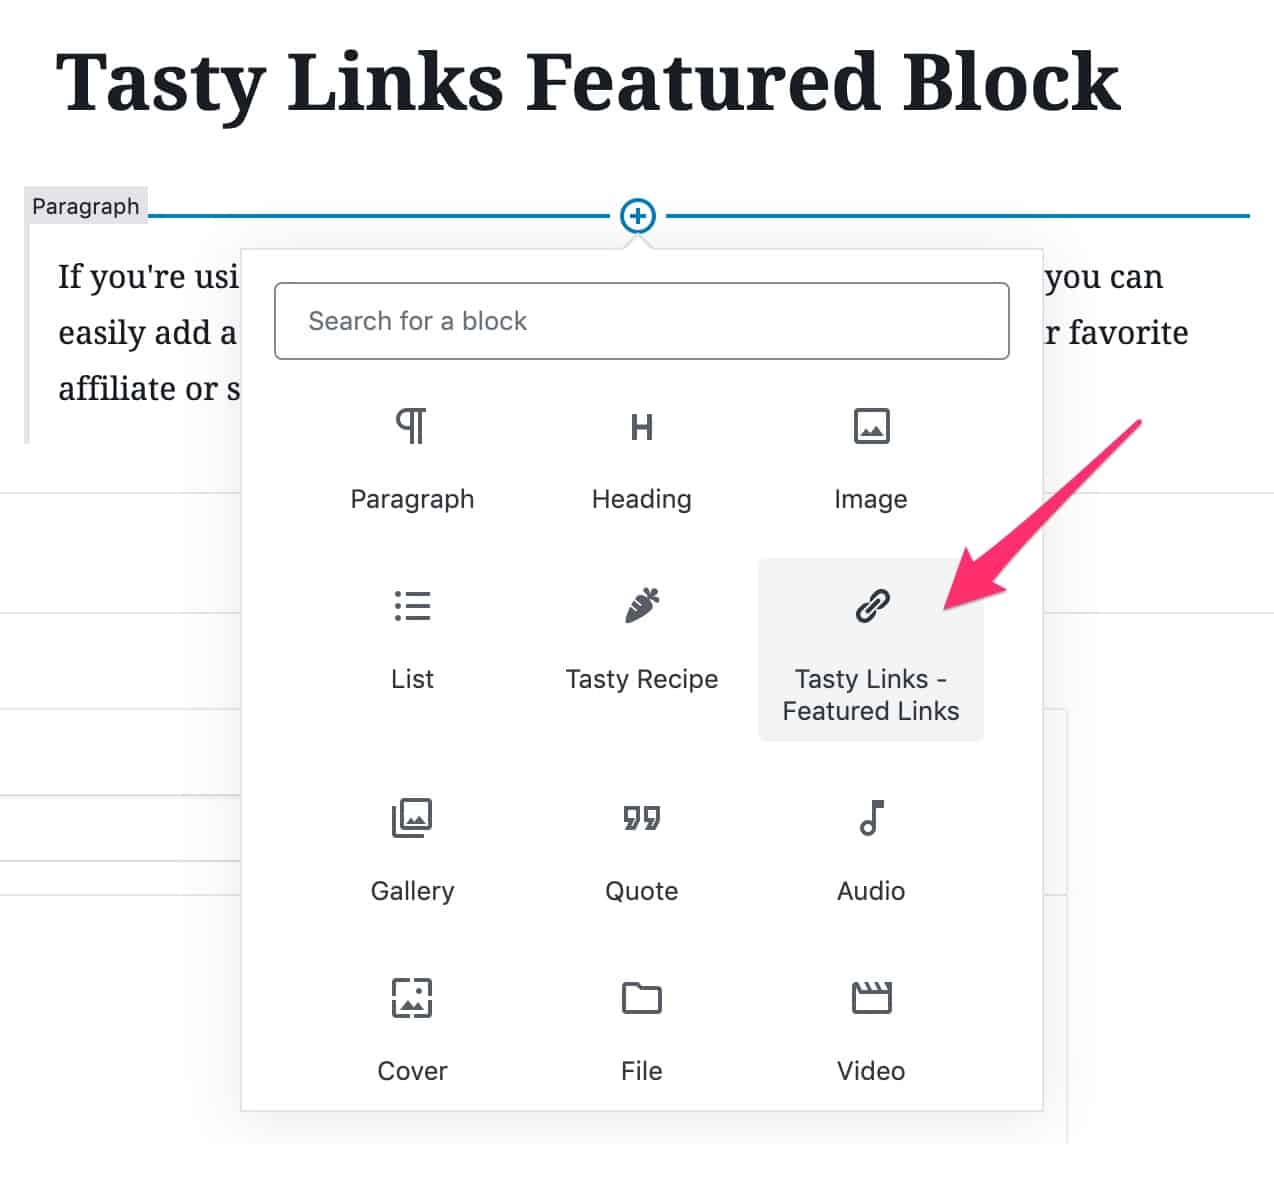 You can add affiliate links using feature blocks too.